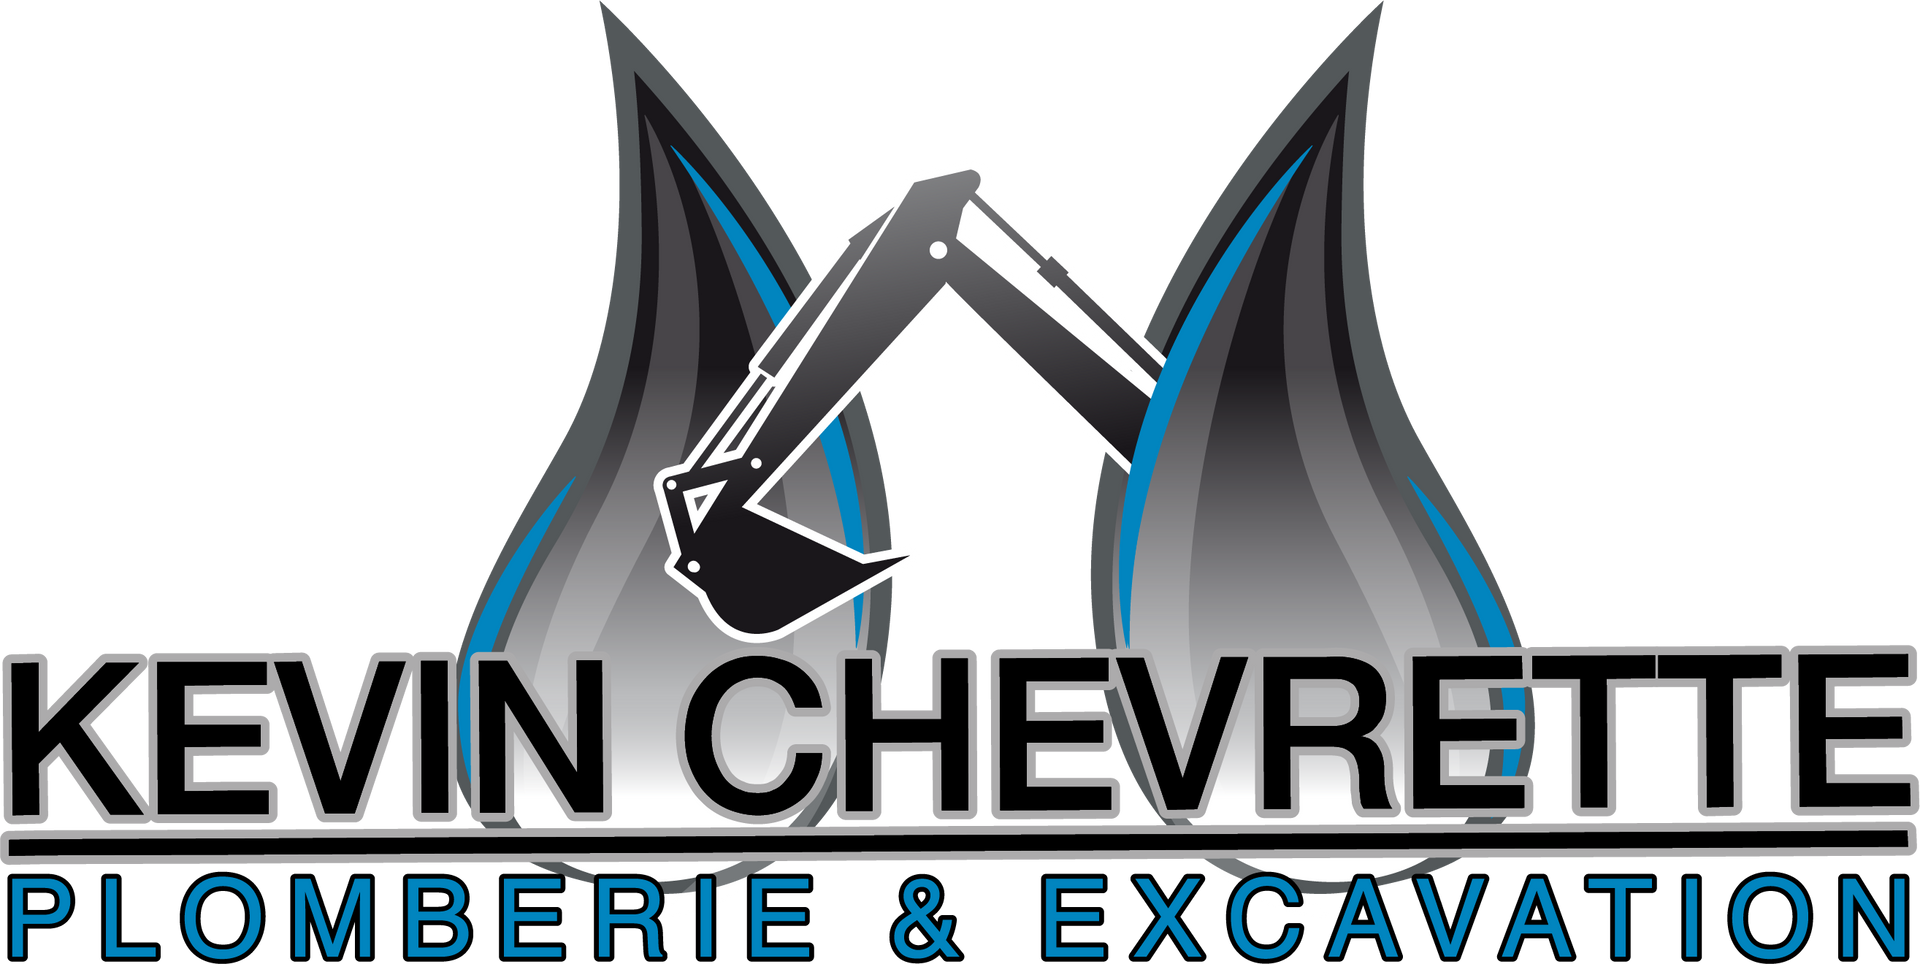 LOGO Kevin Chevrette Plomberie and Excavation